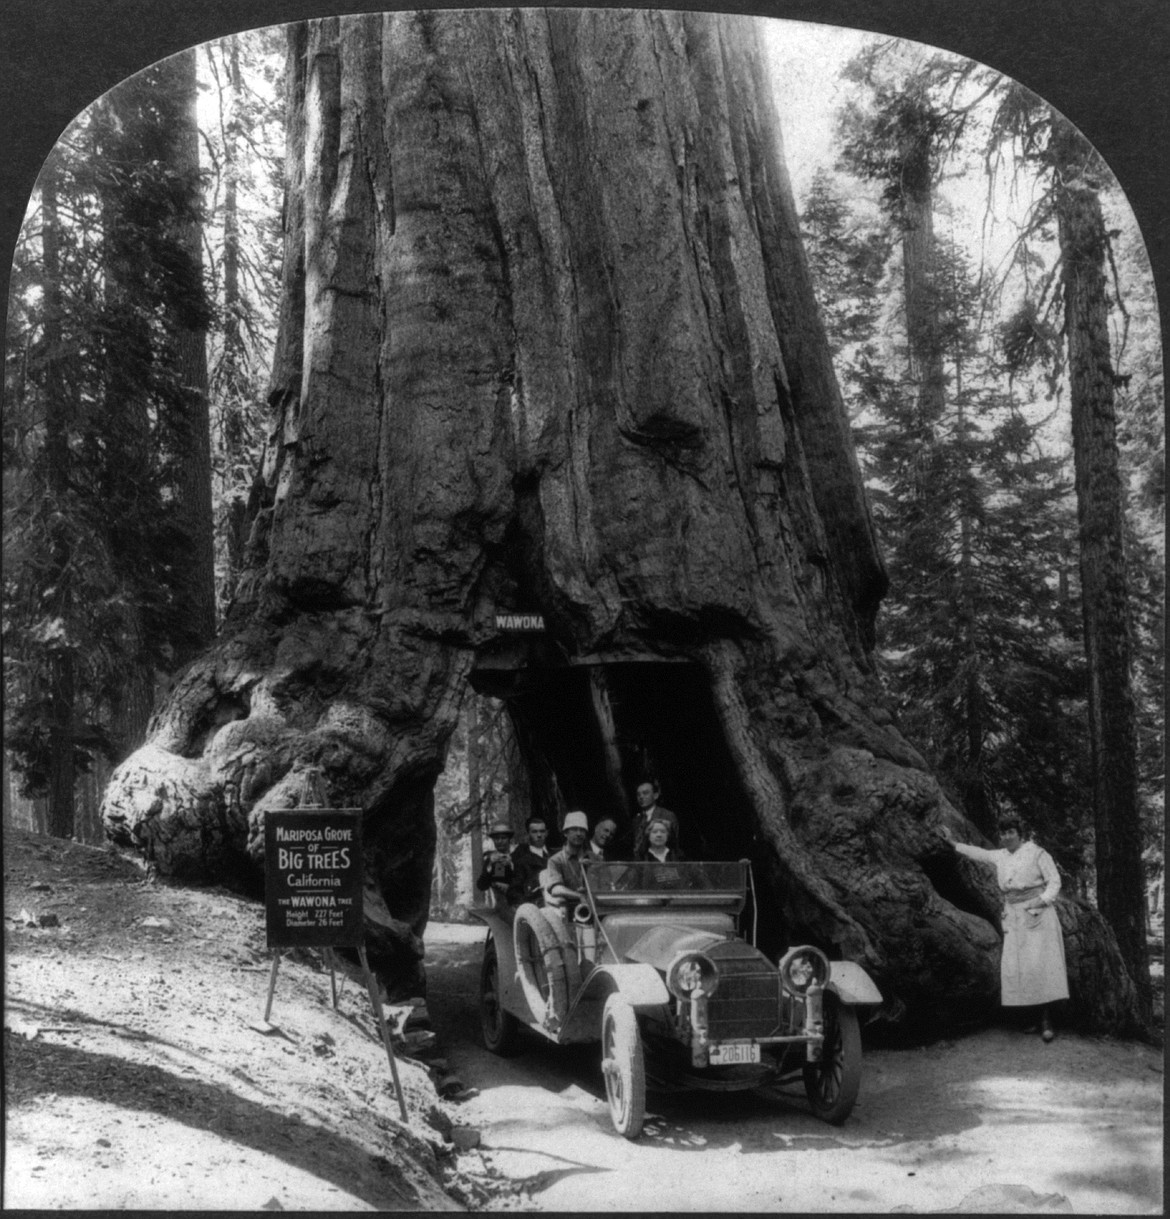 The 2,300-year-old Wawona Tunnel Tree in Yosemite was cut through in 1881, becoming a great visitor attraction, but was toppled be a heavy snow load in 1969.